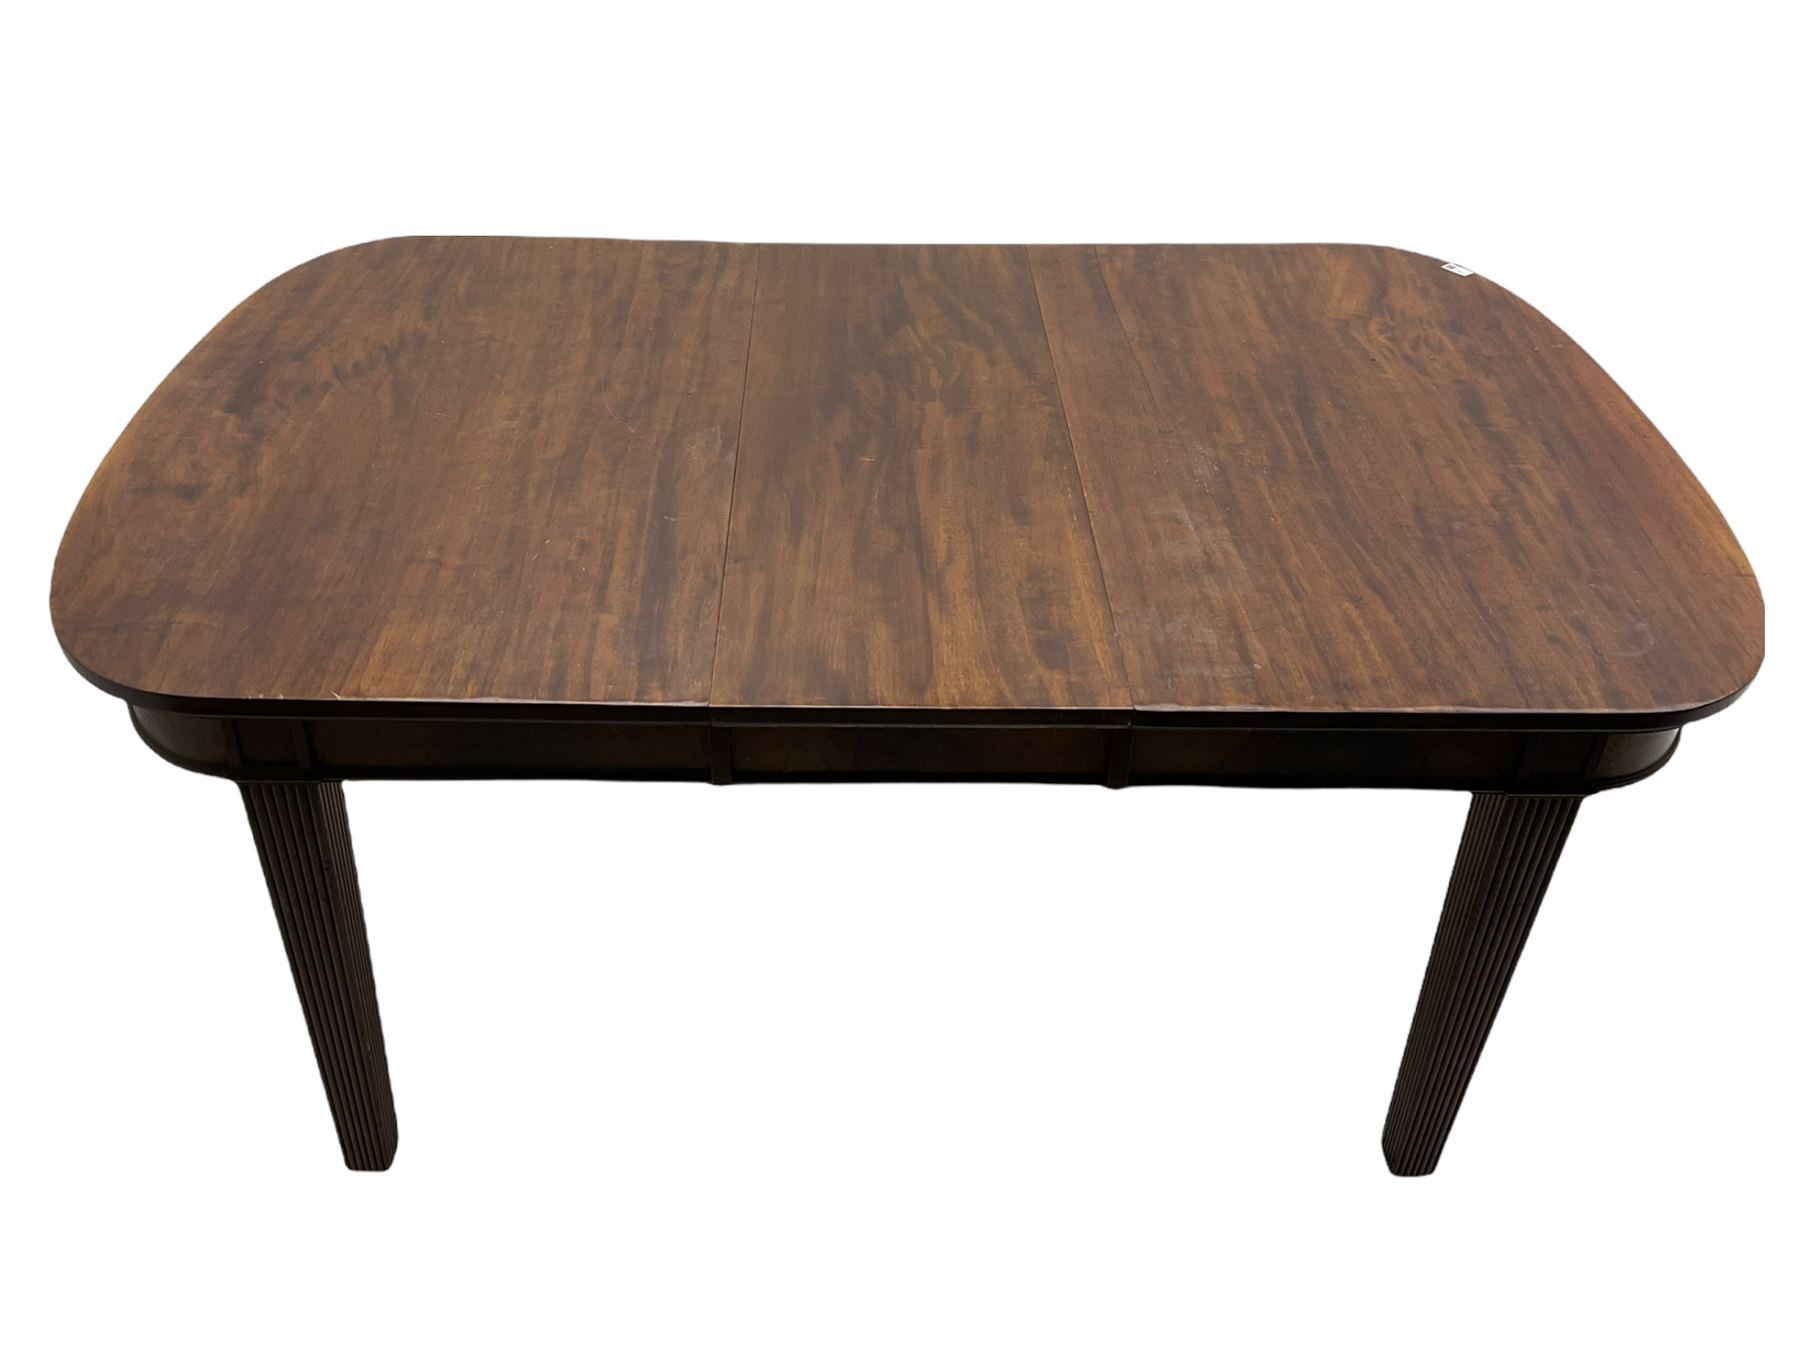 19th century mahogany extending dining table with leaf - Image 9 of 11